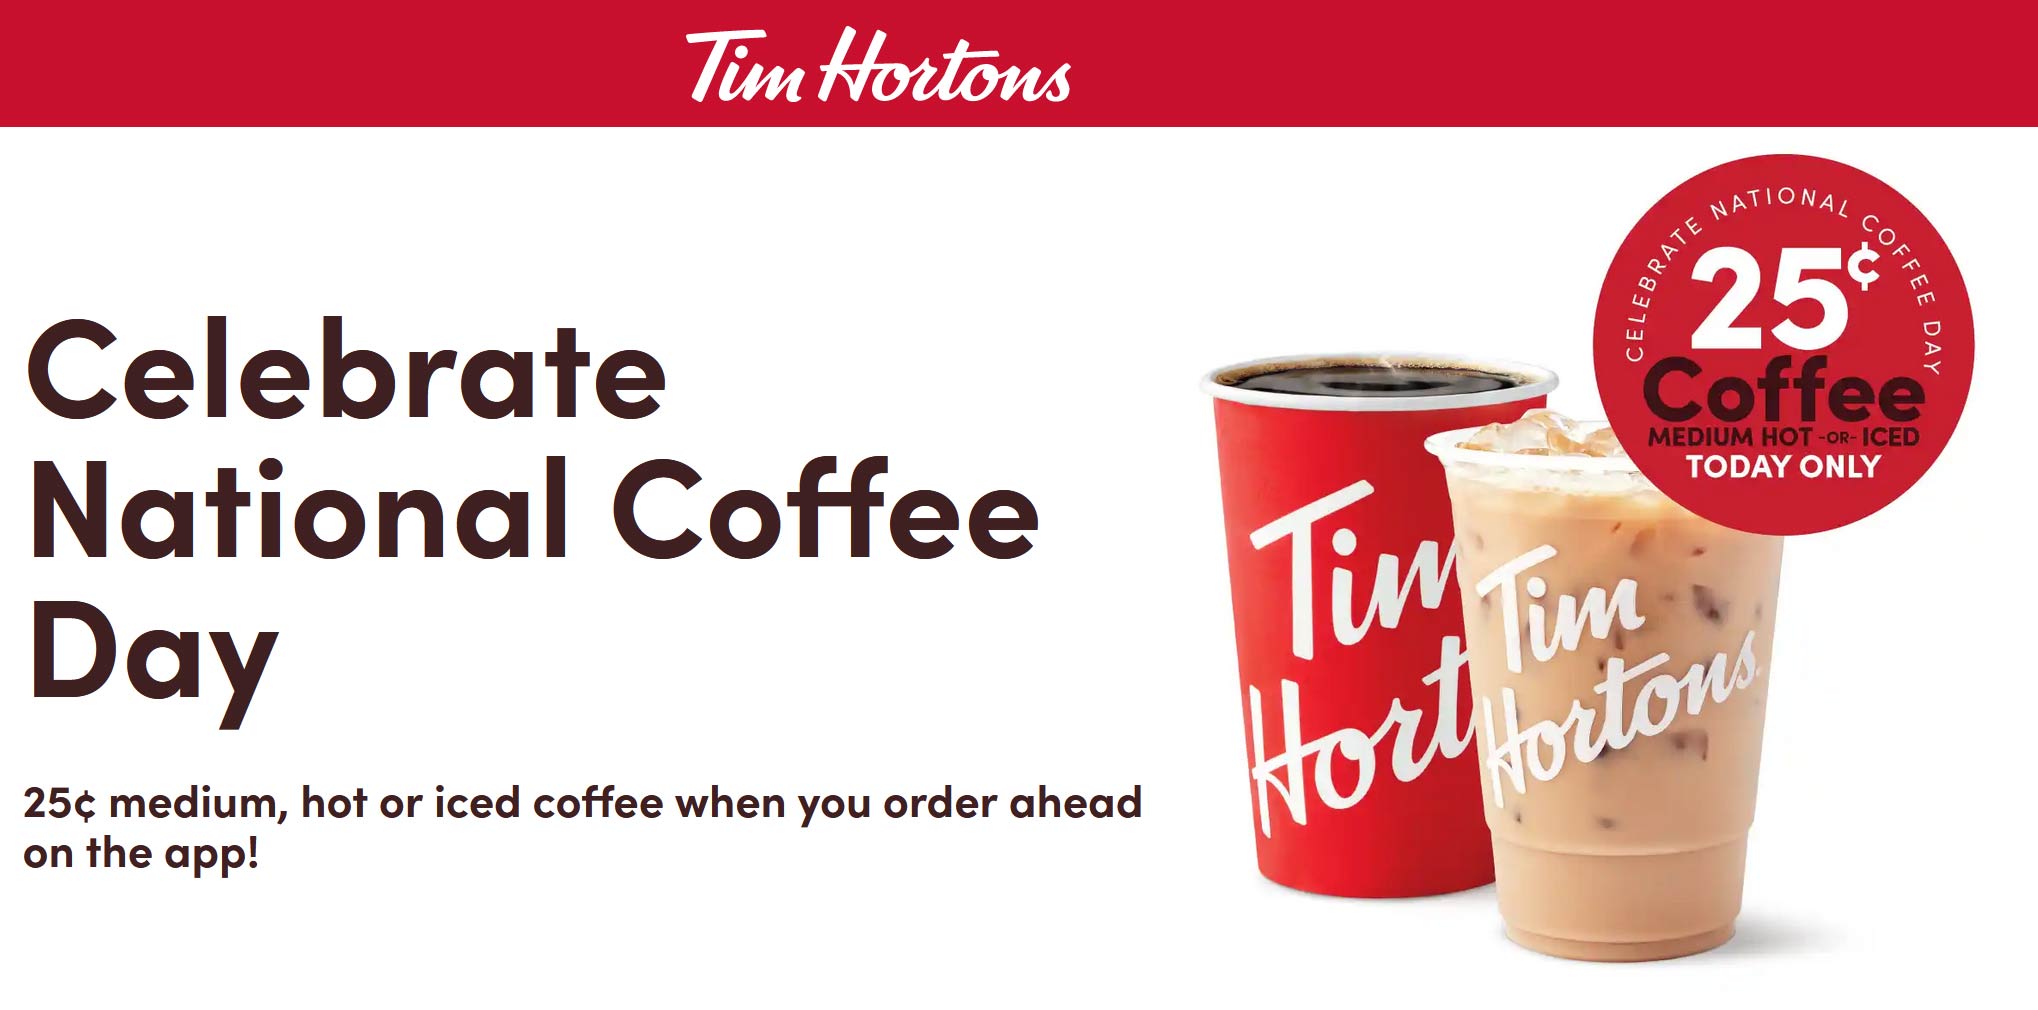 Tim Hortons restaurants Coupon  .25 cent coffee today at Tim Hortons #timhortons 